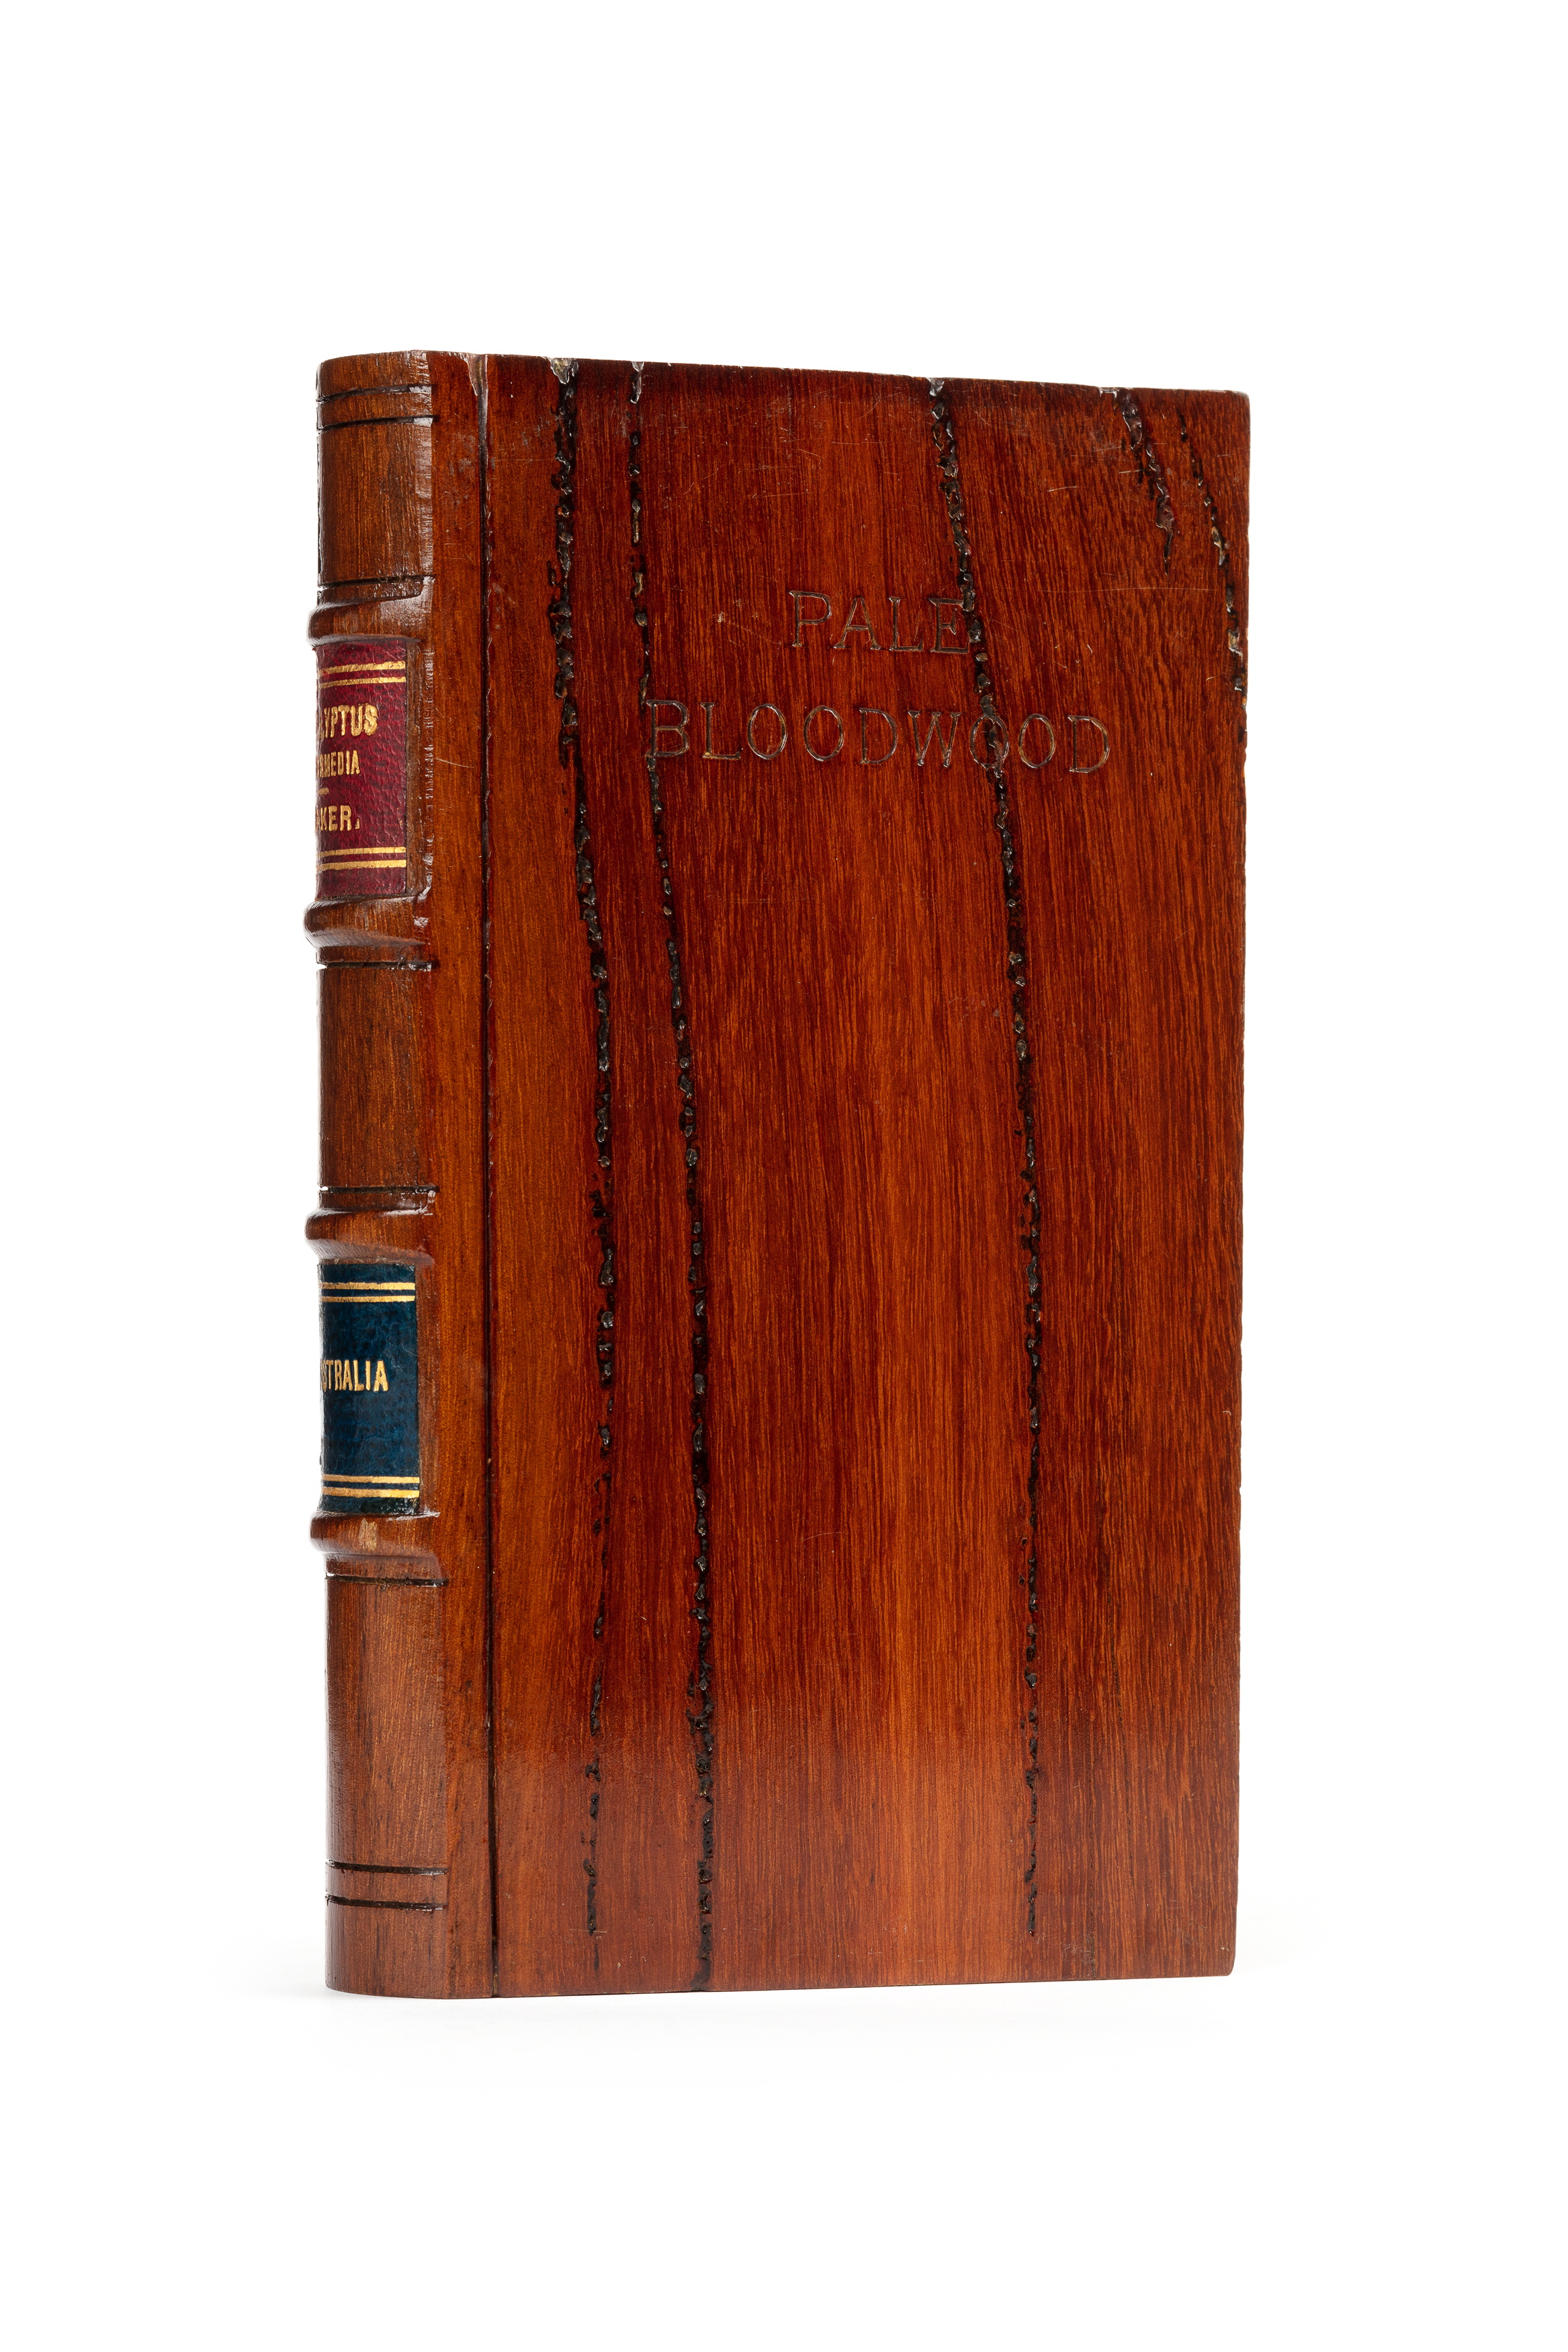 'Eucalyptus intermedia / Pale Bloodwood' timber sample in the form of a book